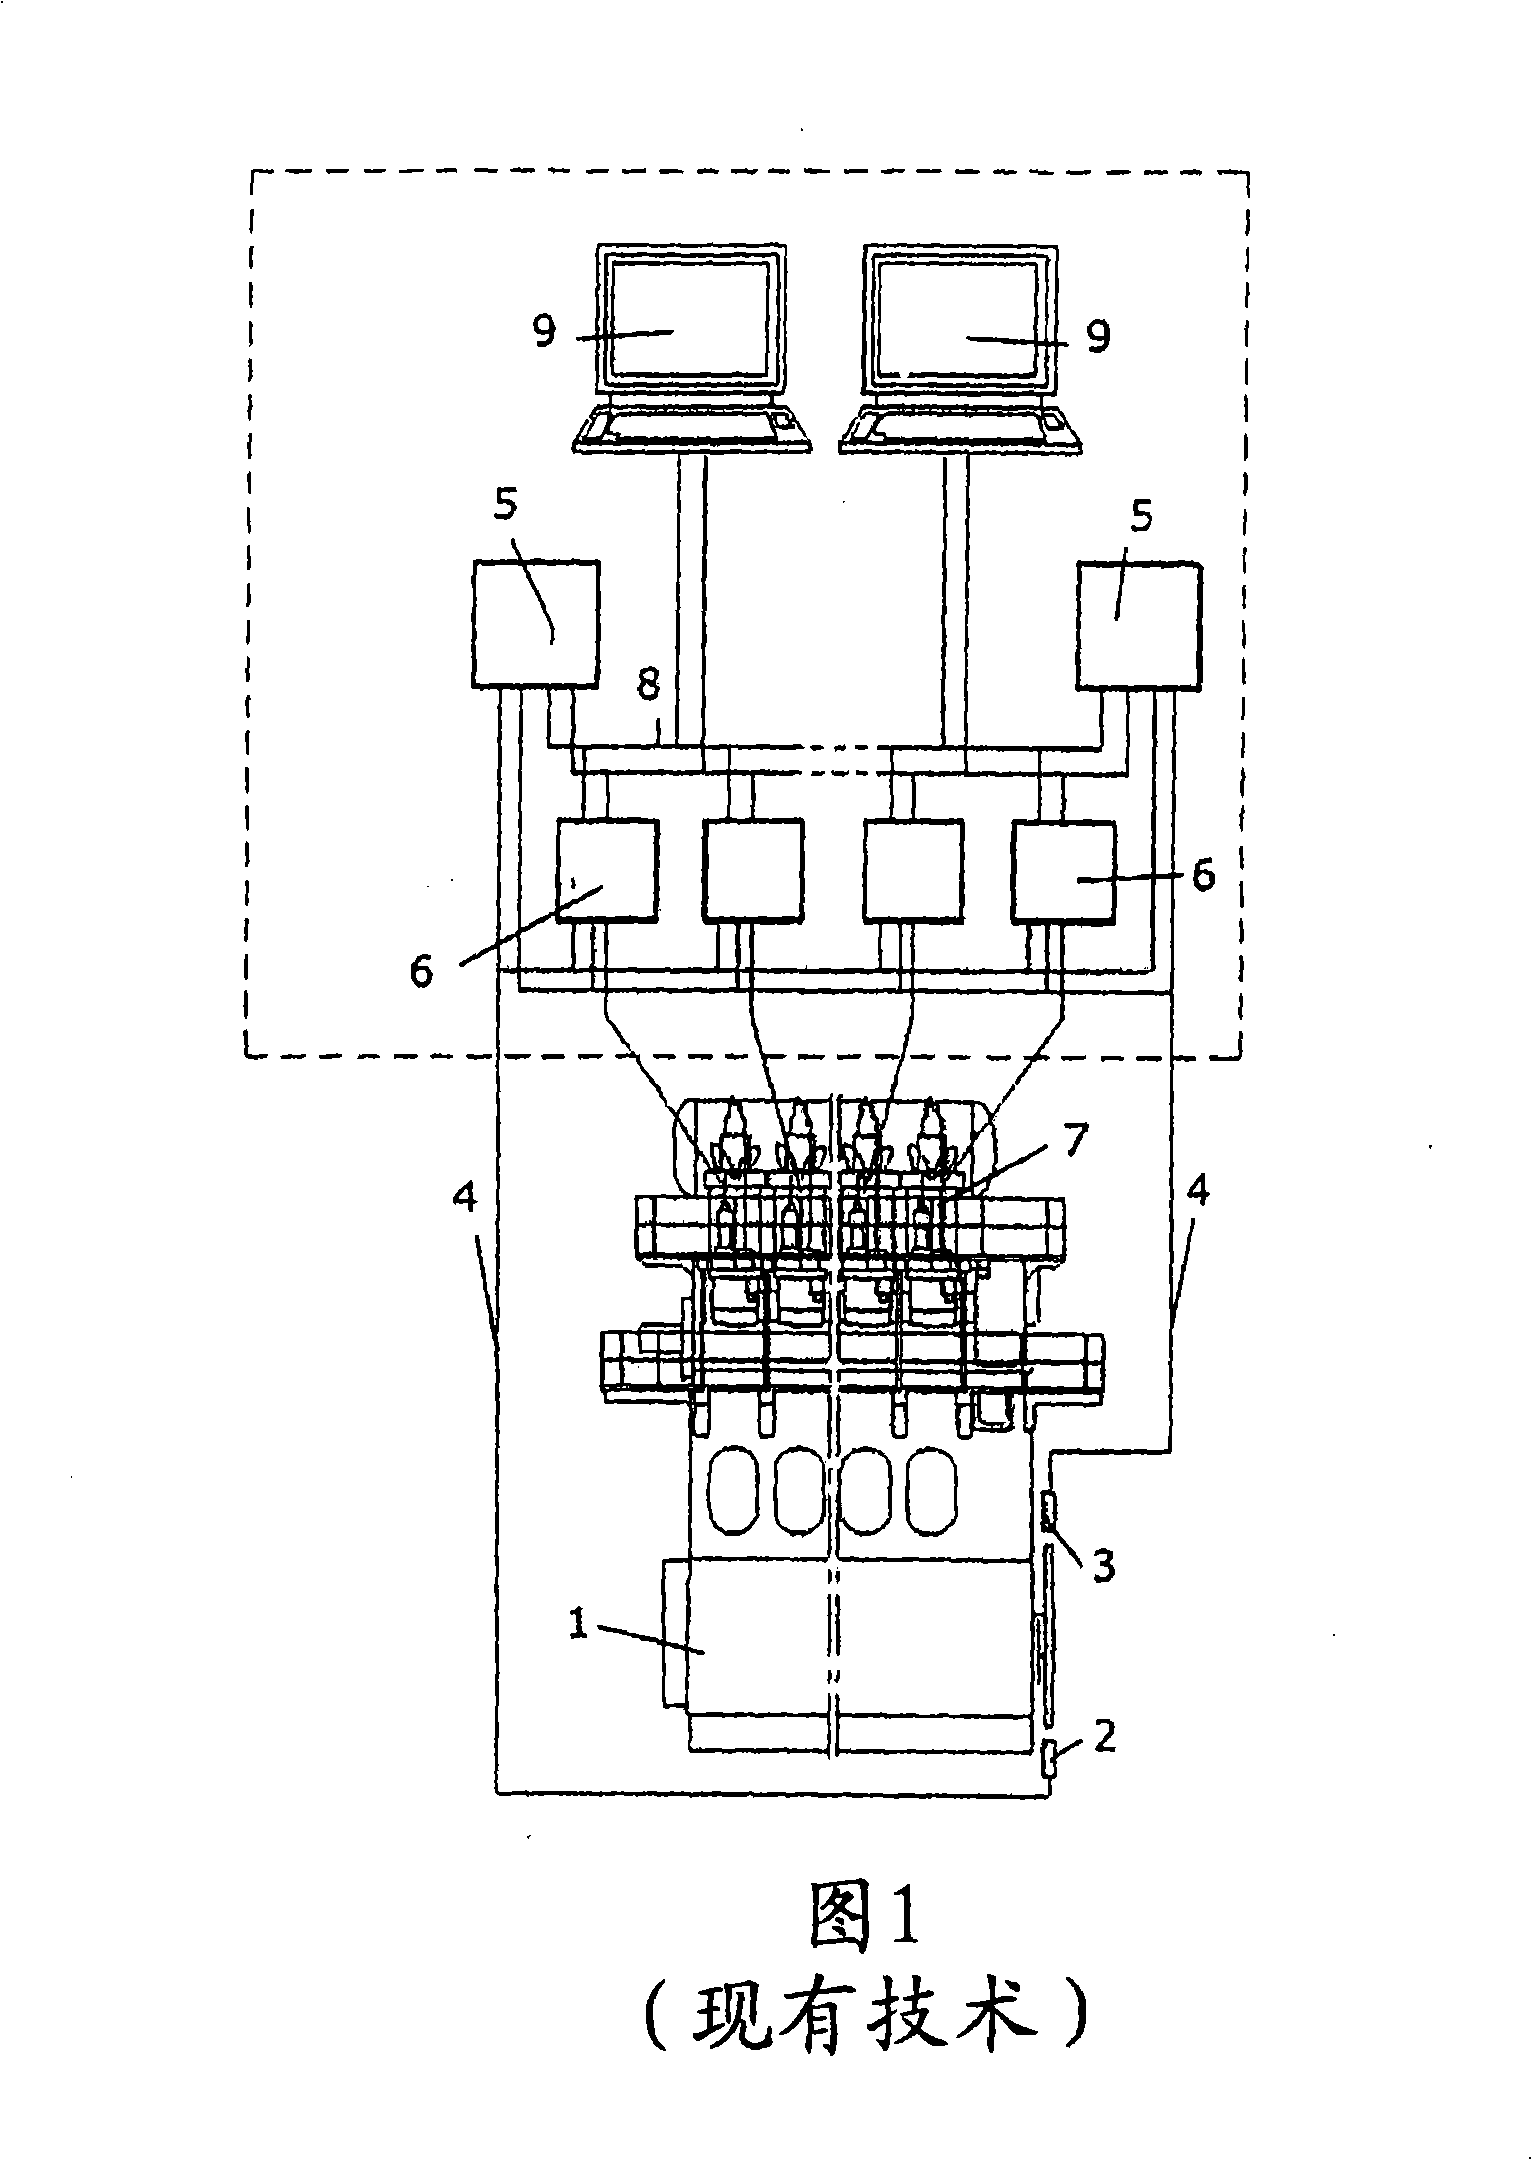 Method and system for controlling multi-cylinder internal combustion engine